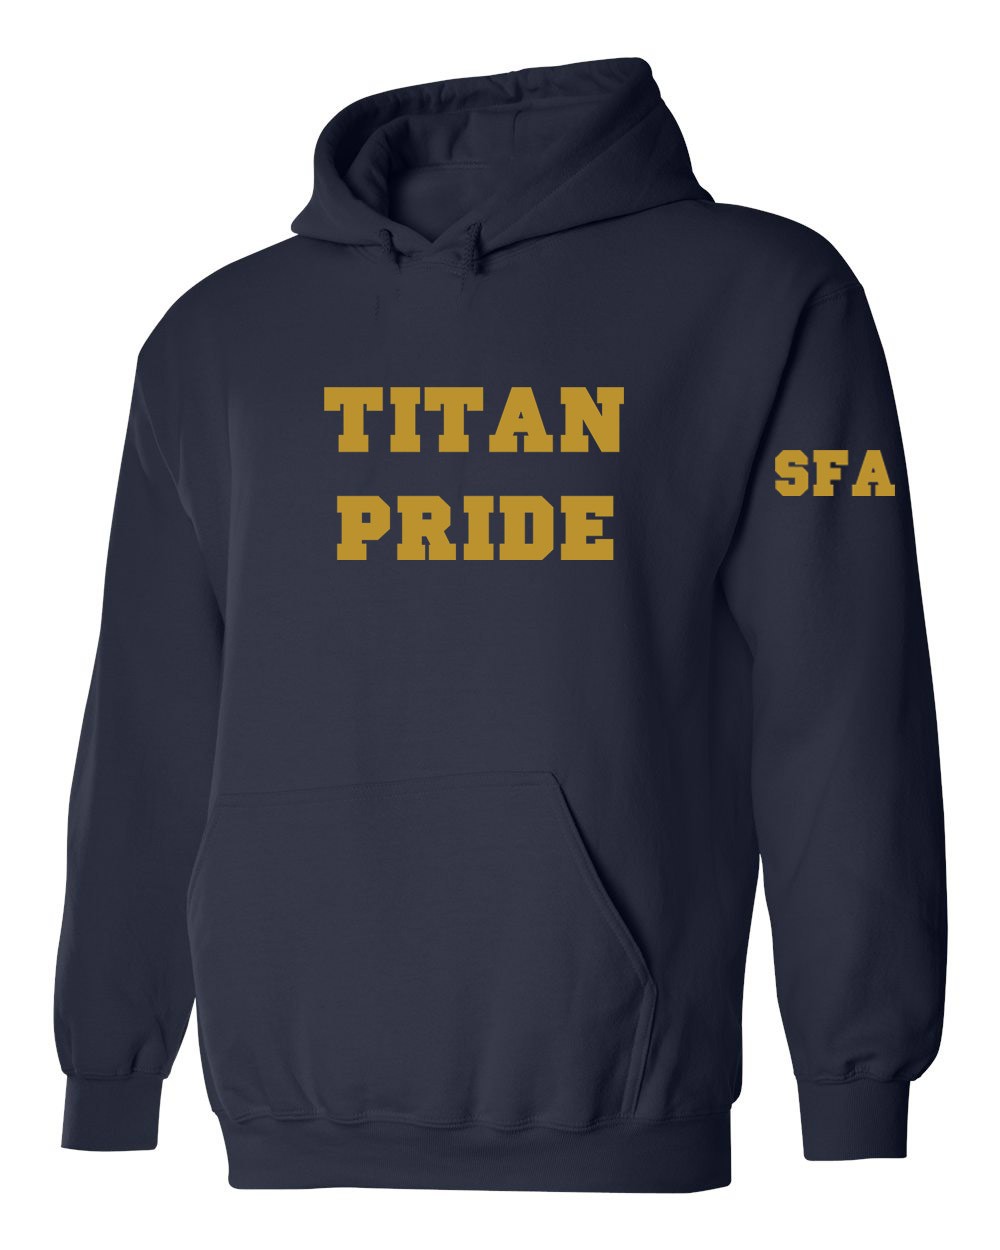 SFA Spirit Pullover Hoodie w/Gold Logo & Custom Name #28 - Please Allow 2-3 Weeks for Fulfillment